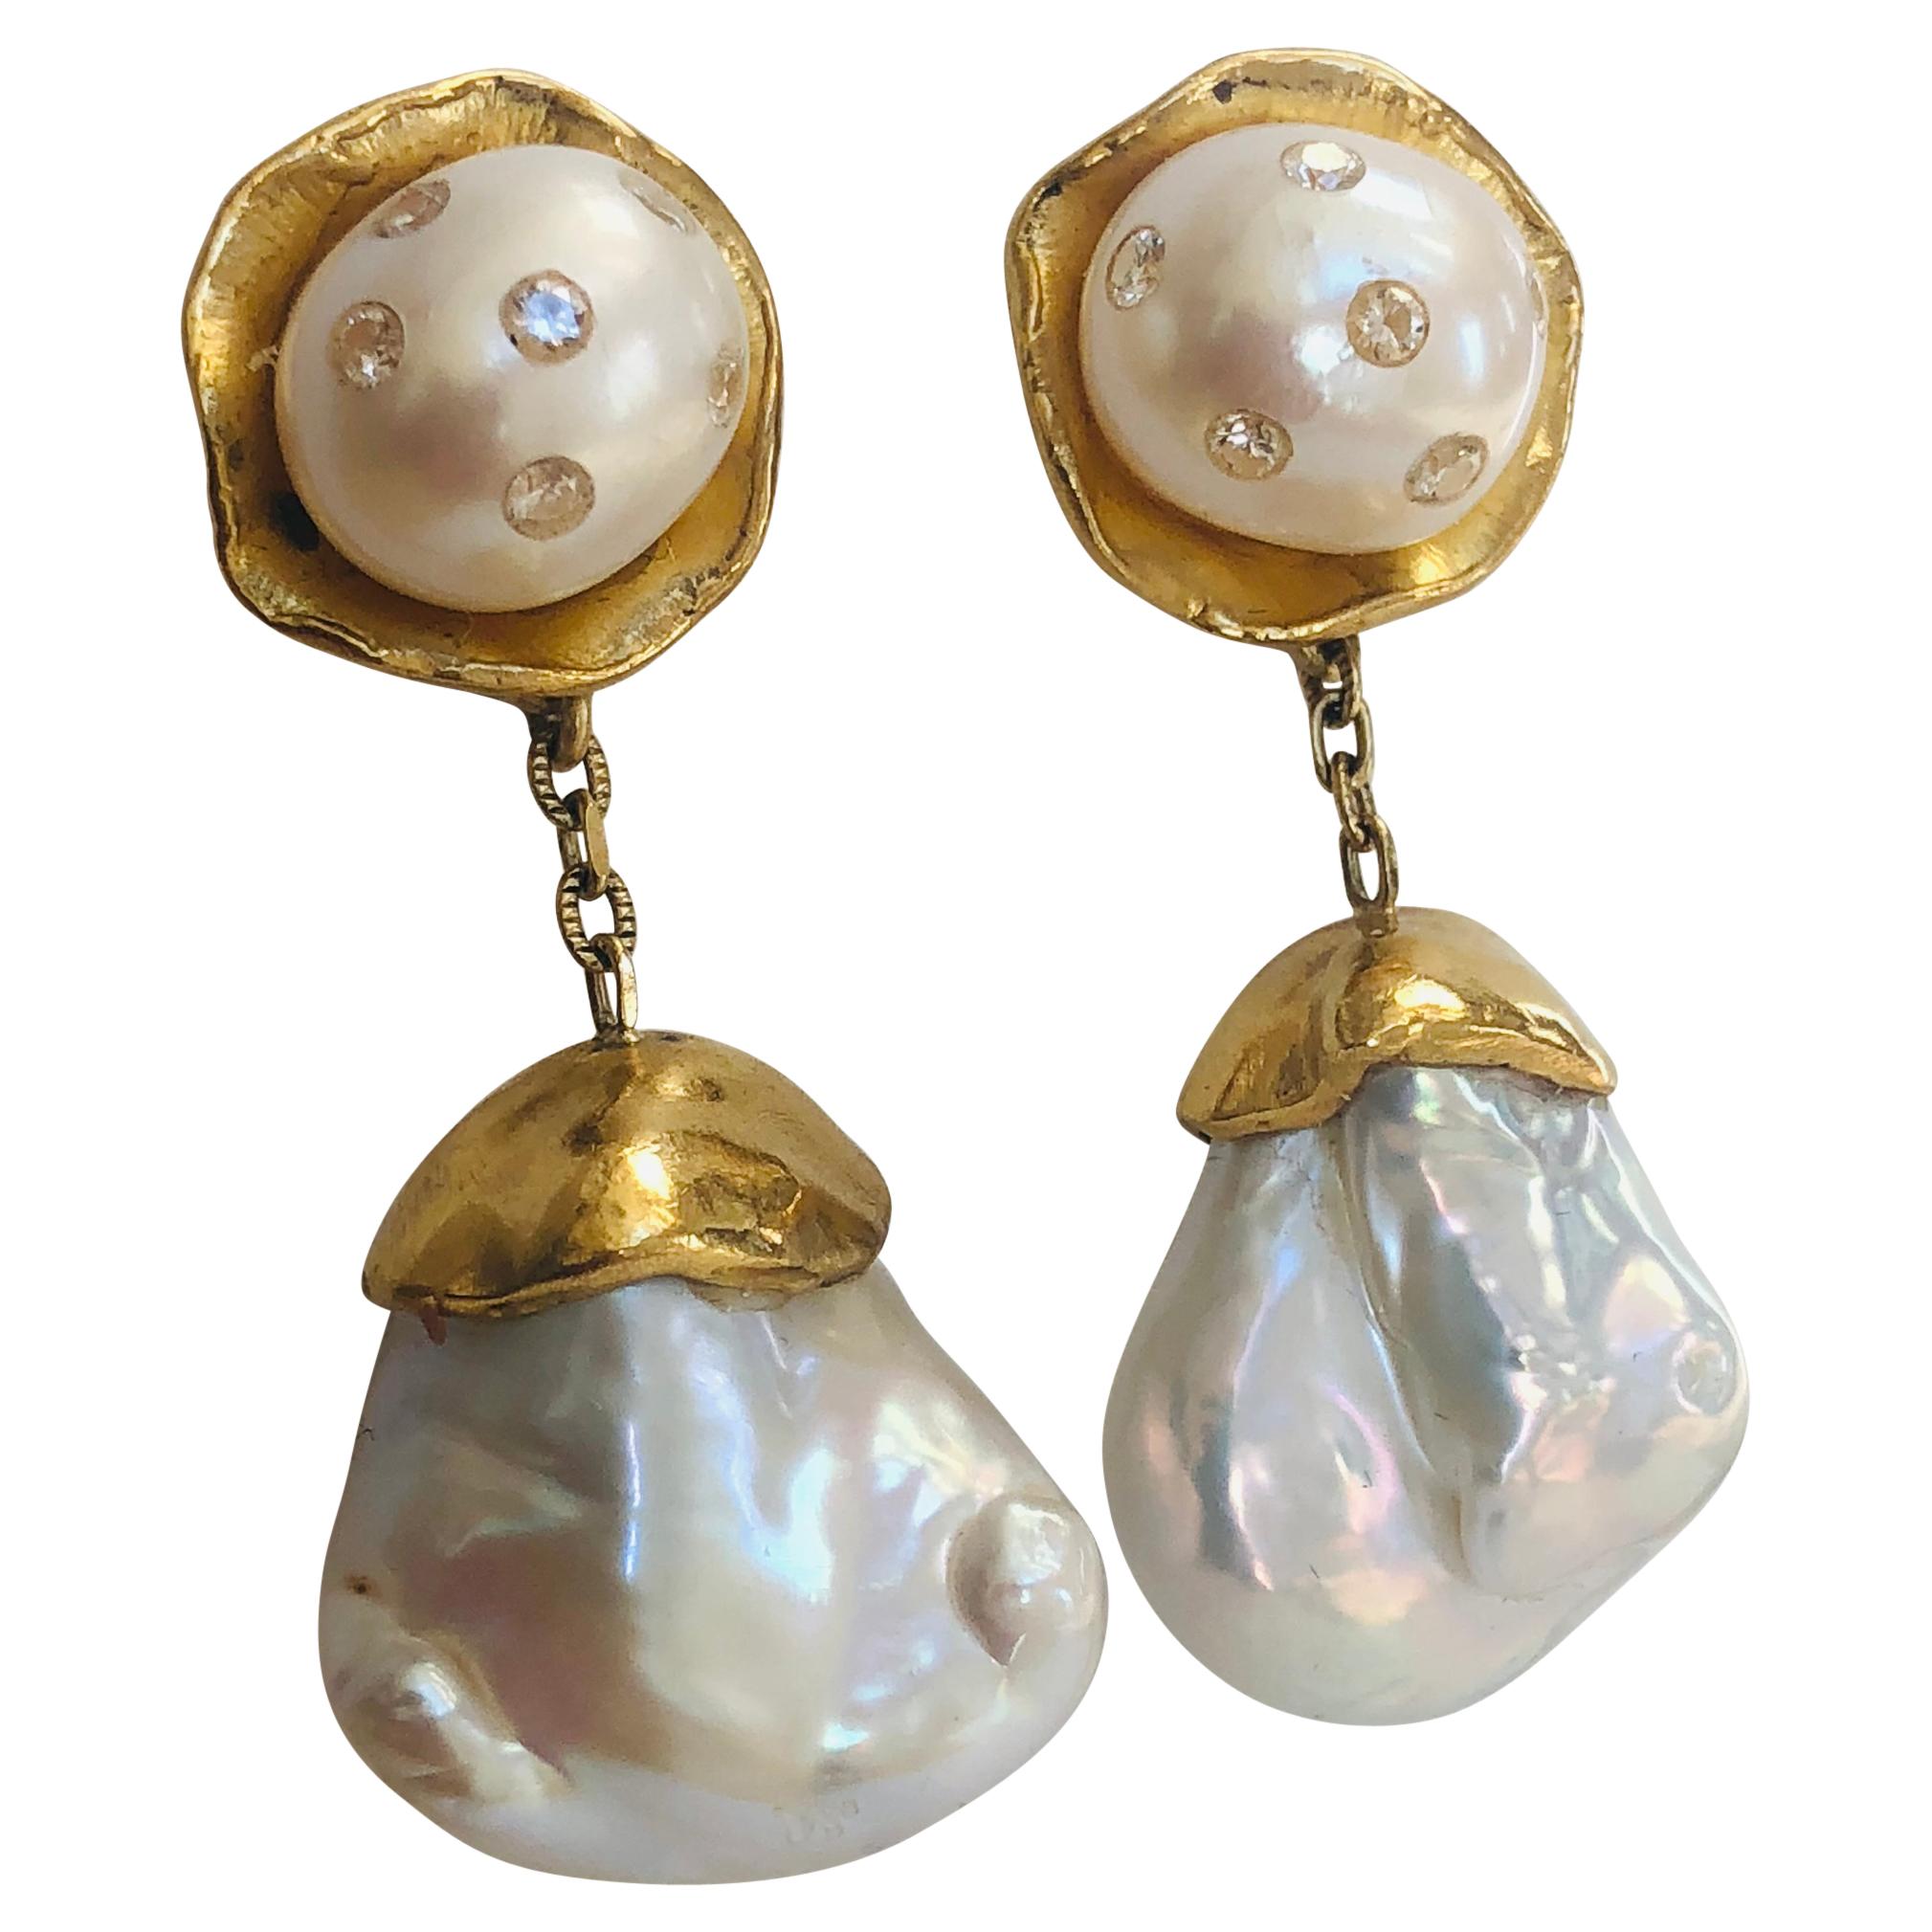 22k Gold Pearl Earrings with Detachable Pearl Diamond Studs by Tagili